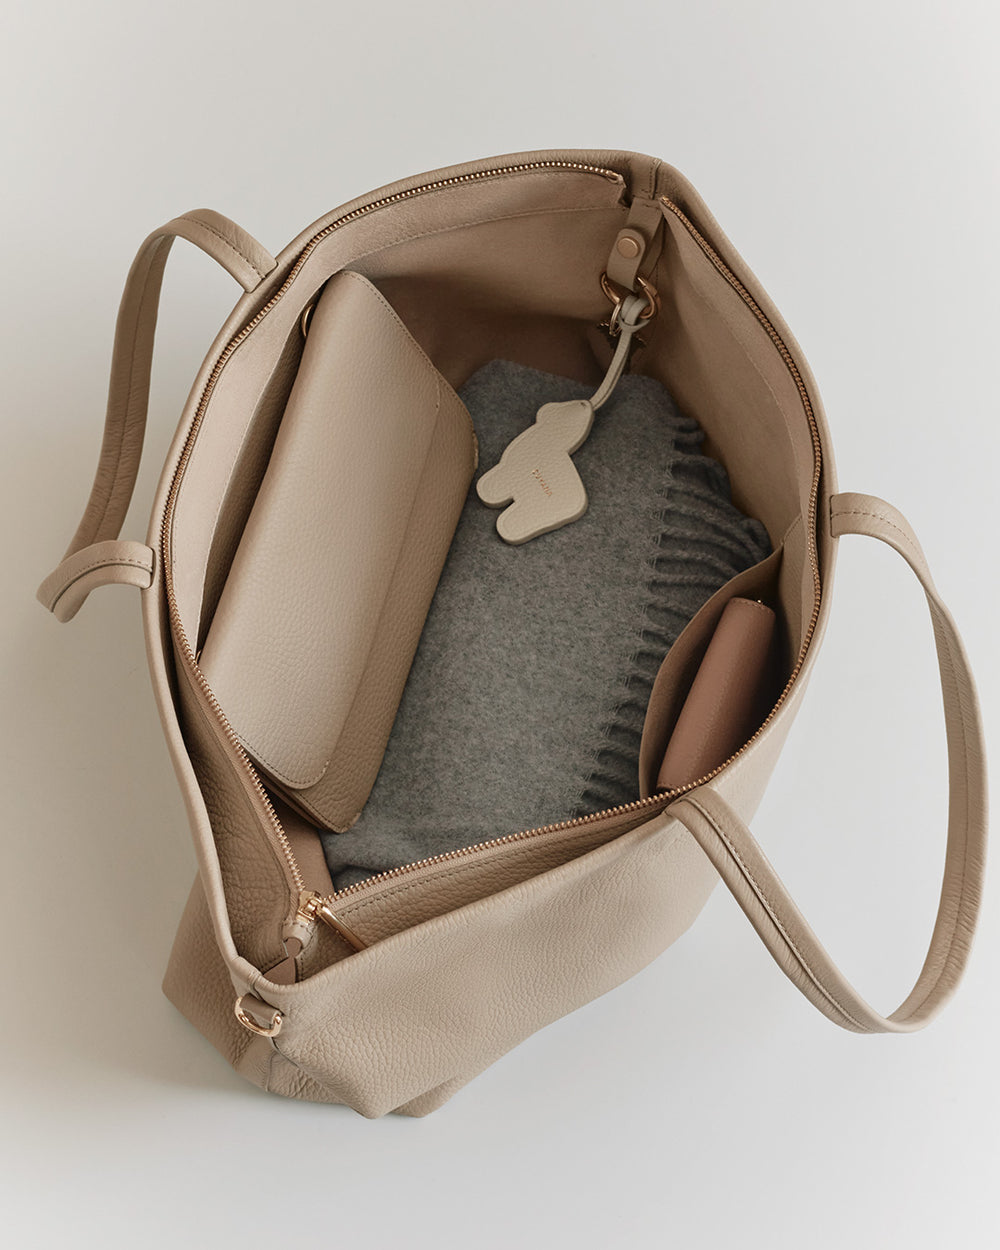 Open bag with a wallet, book, and keychain inside.